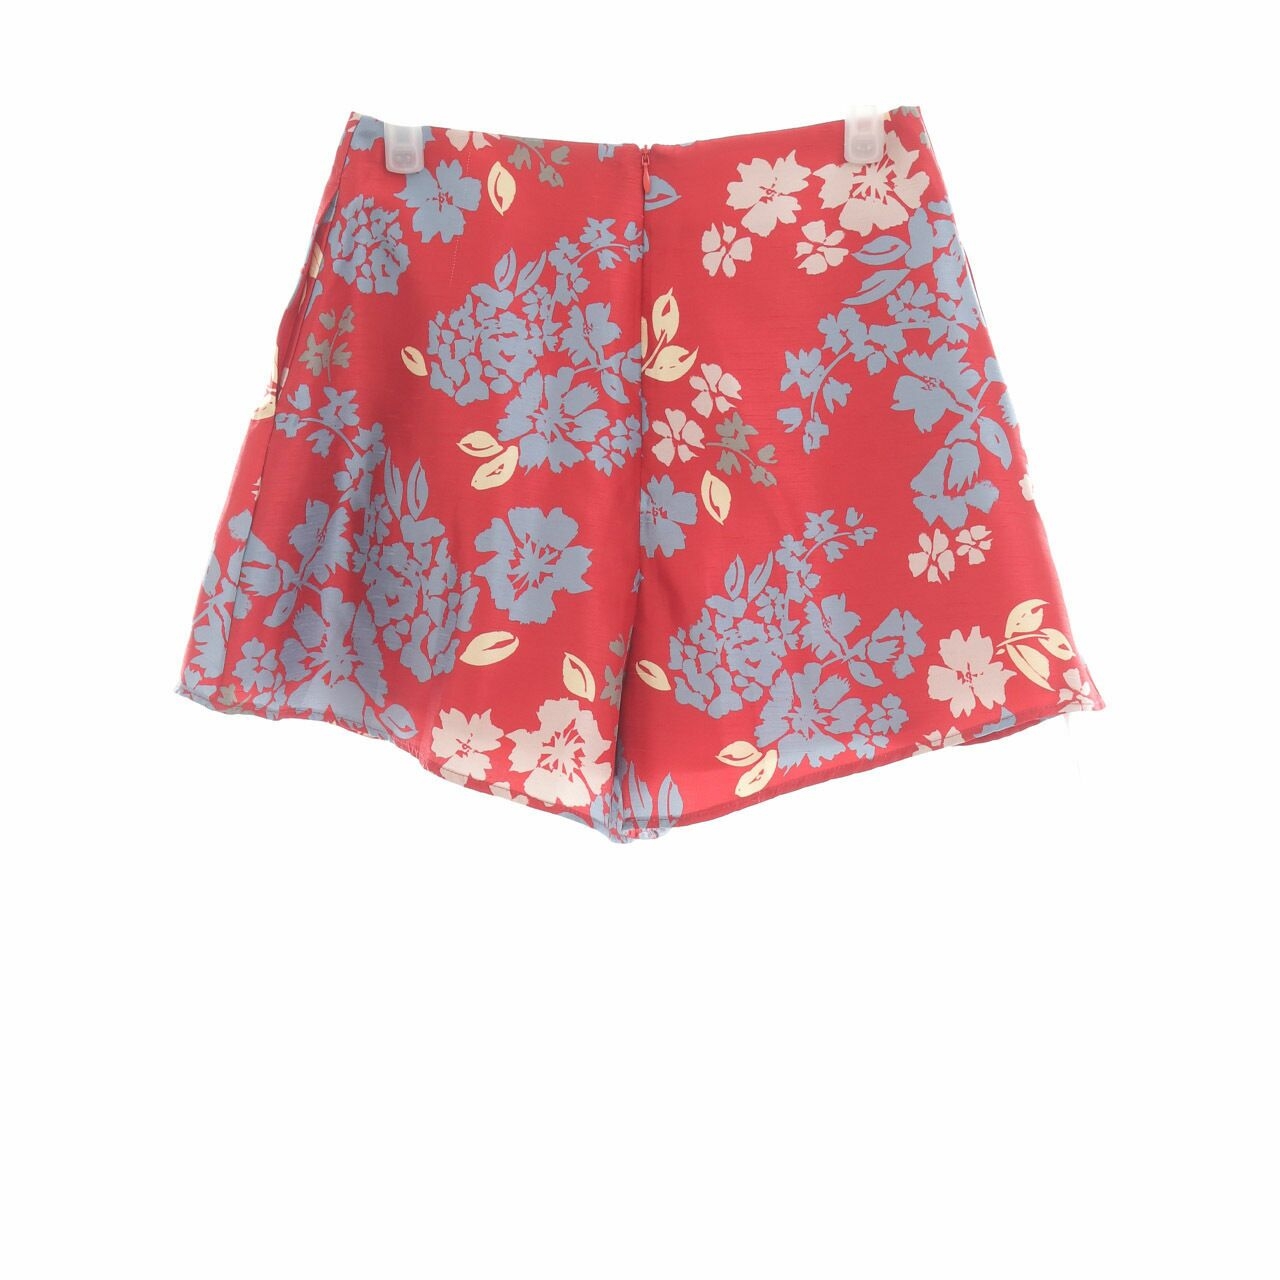 C/MEO Collective Red Floral Short Pants